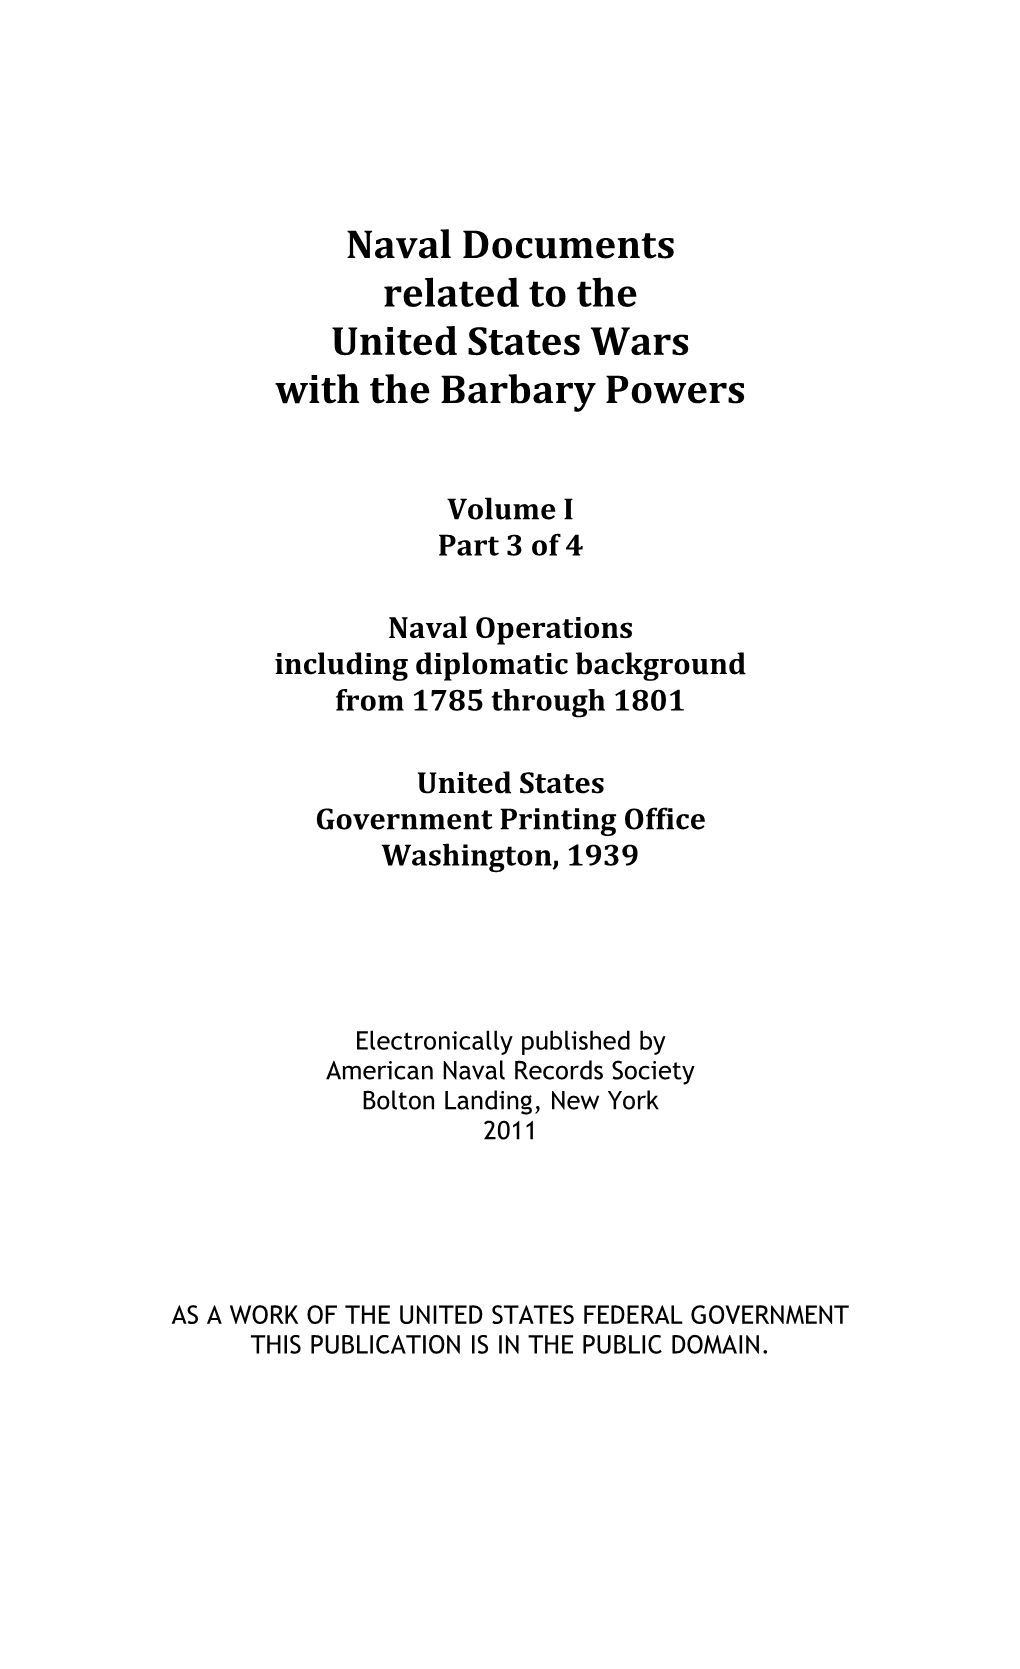 Wars with the Barbary Powers, Volume I Part 3